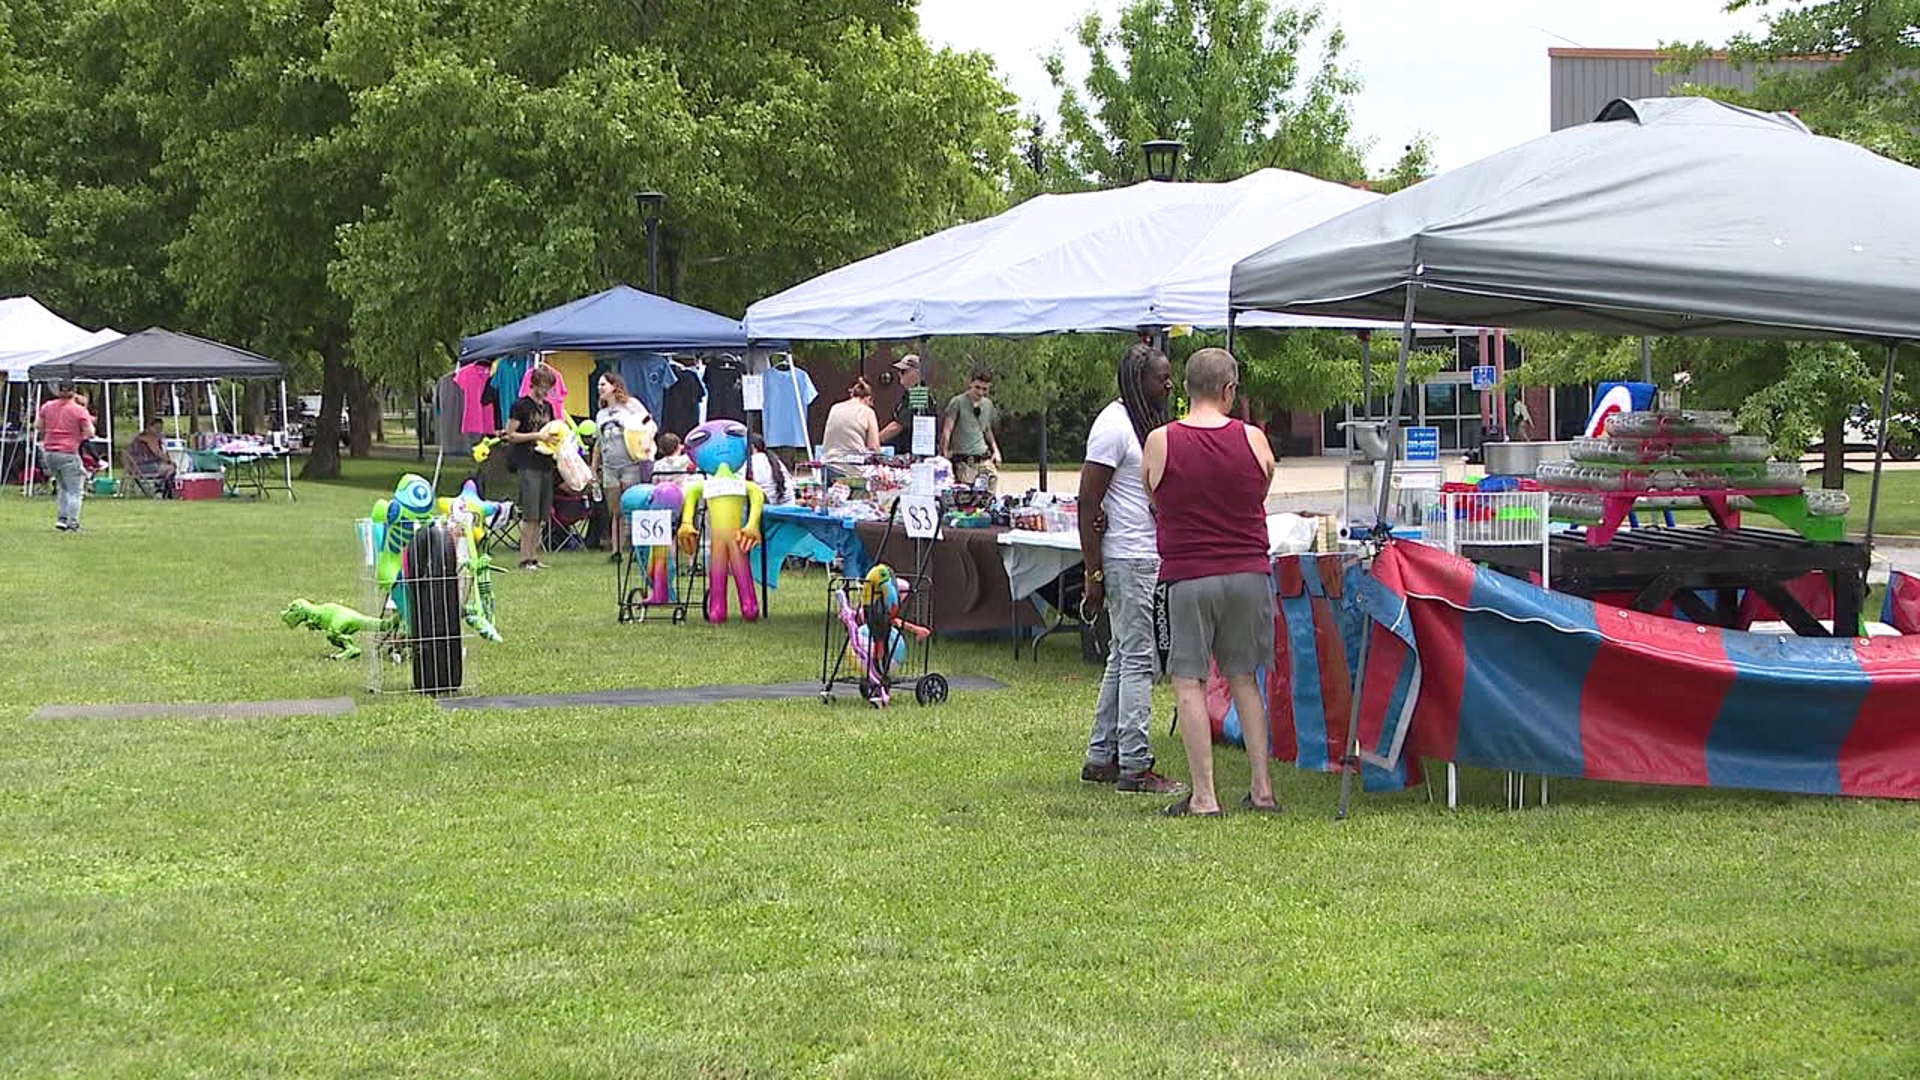 A carnival in Wilkes-Barre aimed to raise awareness and funds for children with congenital heart defects.